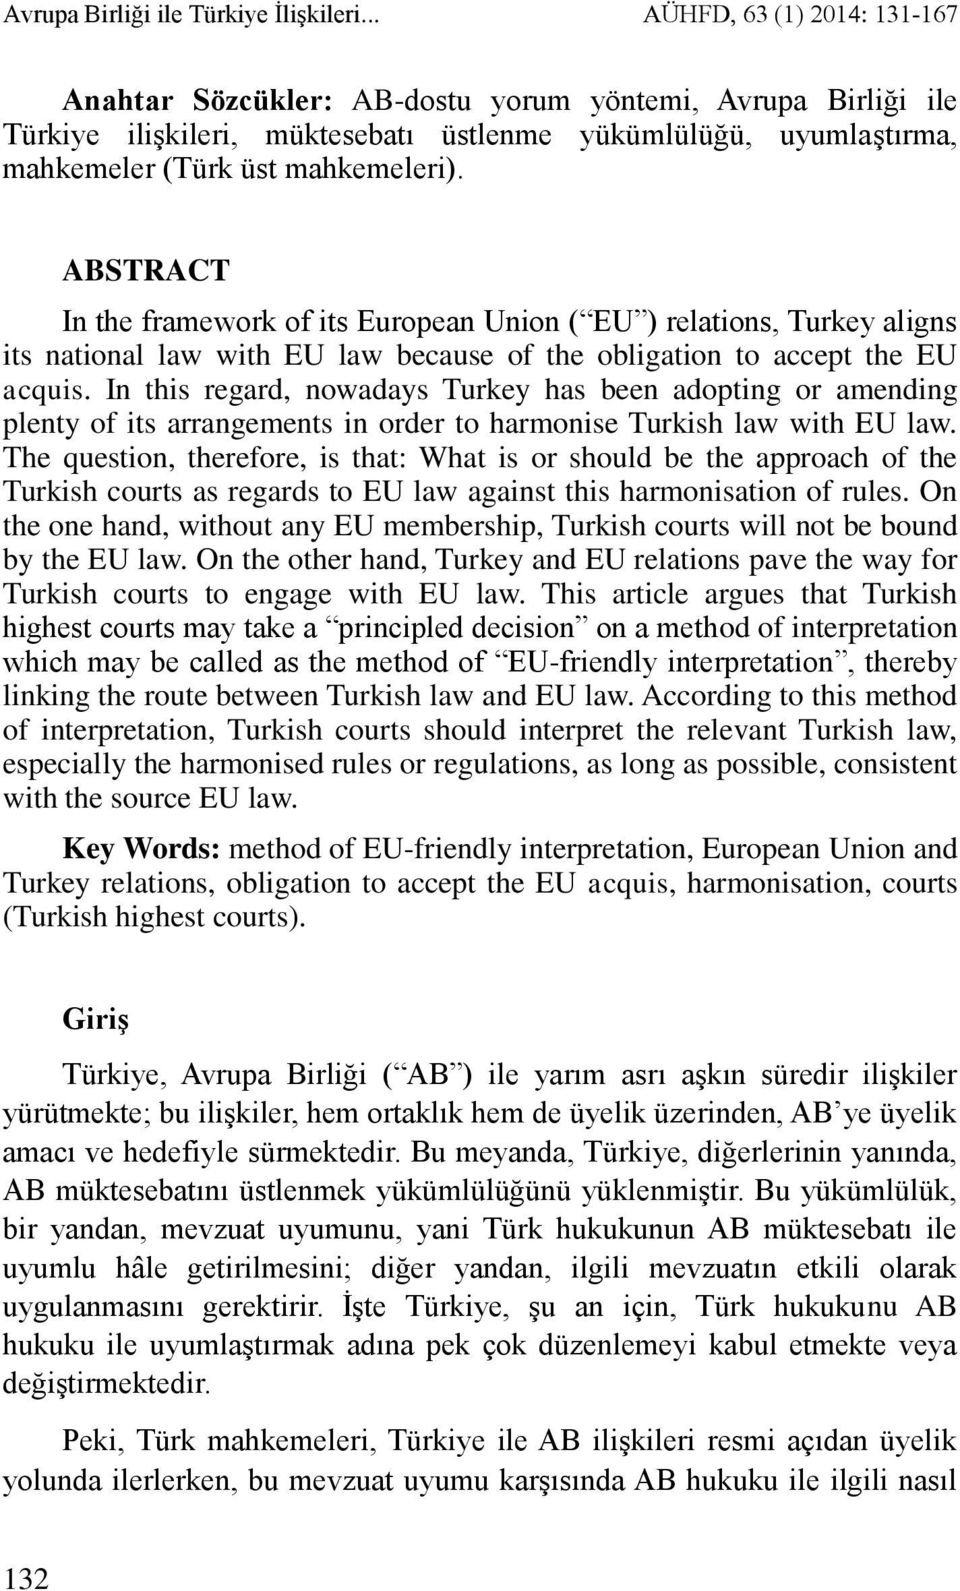 ABSTRACT In the framework of its European Union ( EU ) relations, Turkey aligns its national law with EU law because of the obligation to accept the EU acquis.